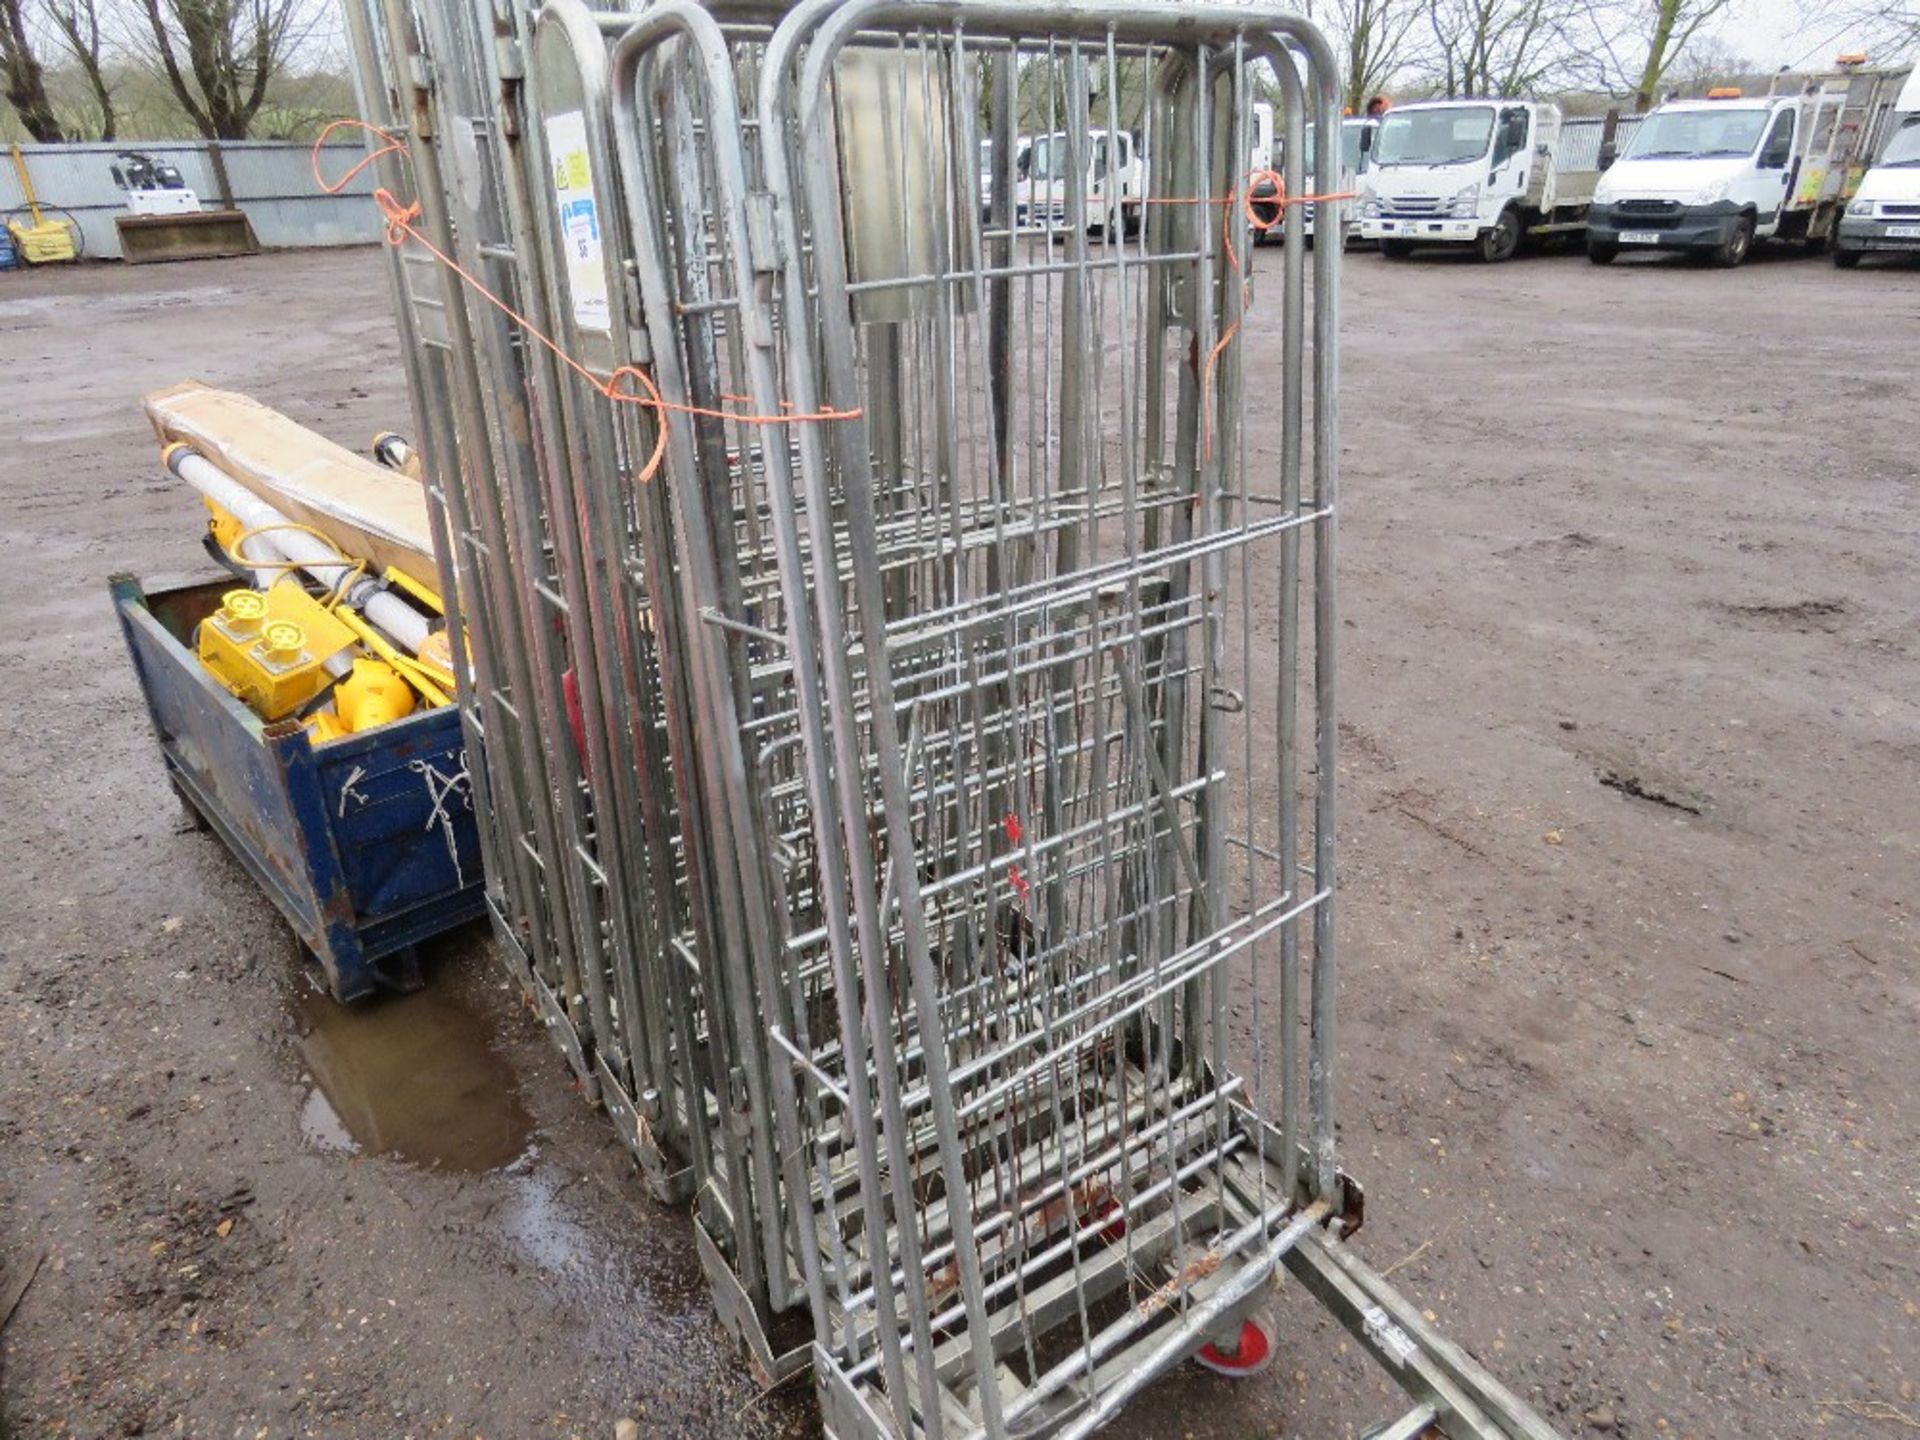 5NO METAL WAREHOUSE TROLLEYS, MESH SIDED.....THIS LOT IS SOLD UNDER THE AUCTIONEERS MARGIN SCHEME, T